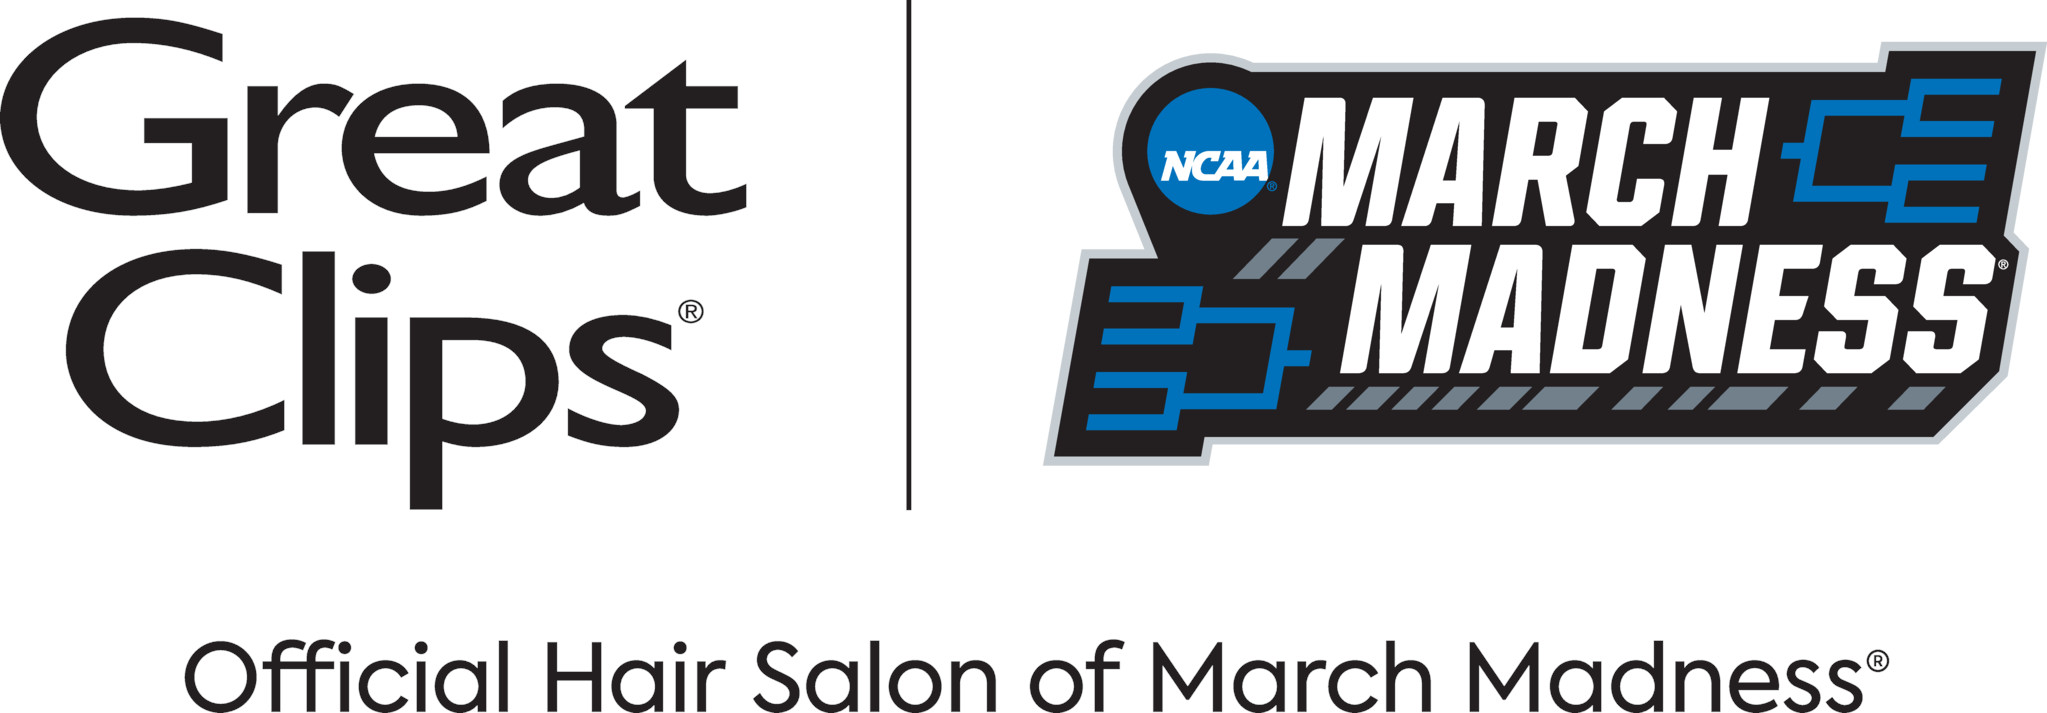 Great Clips is the Official Hair Salon of March Madness